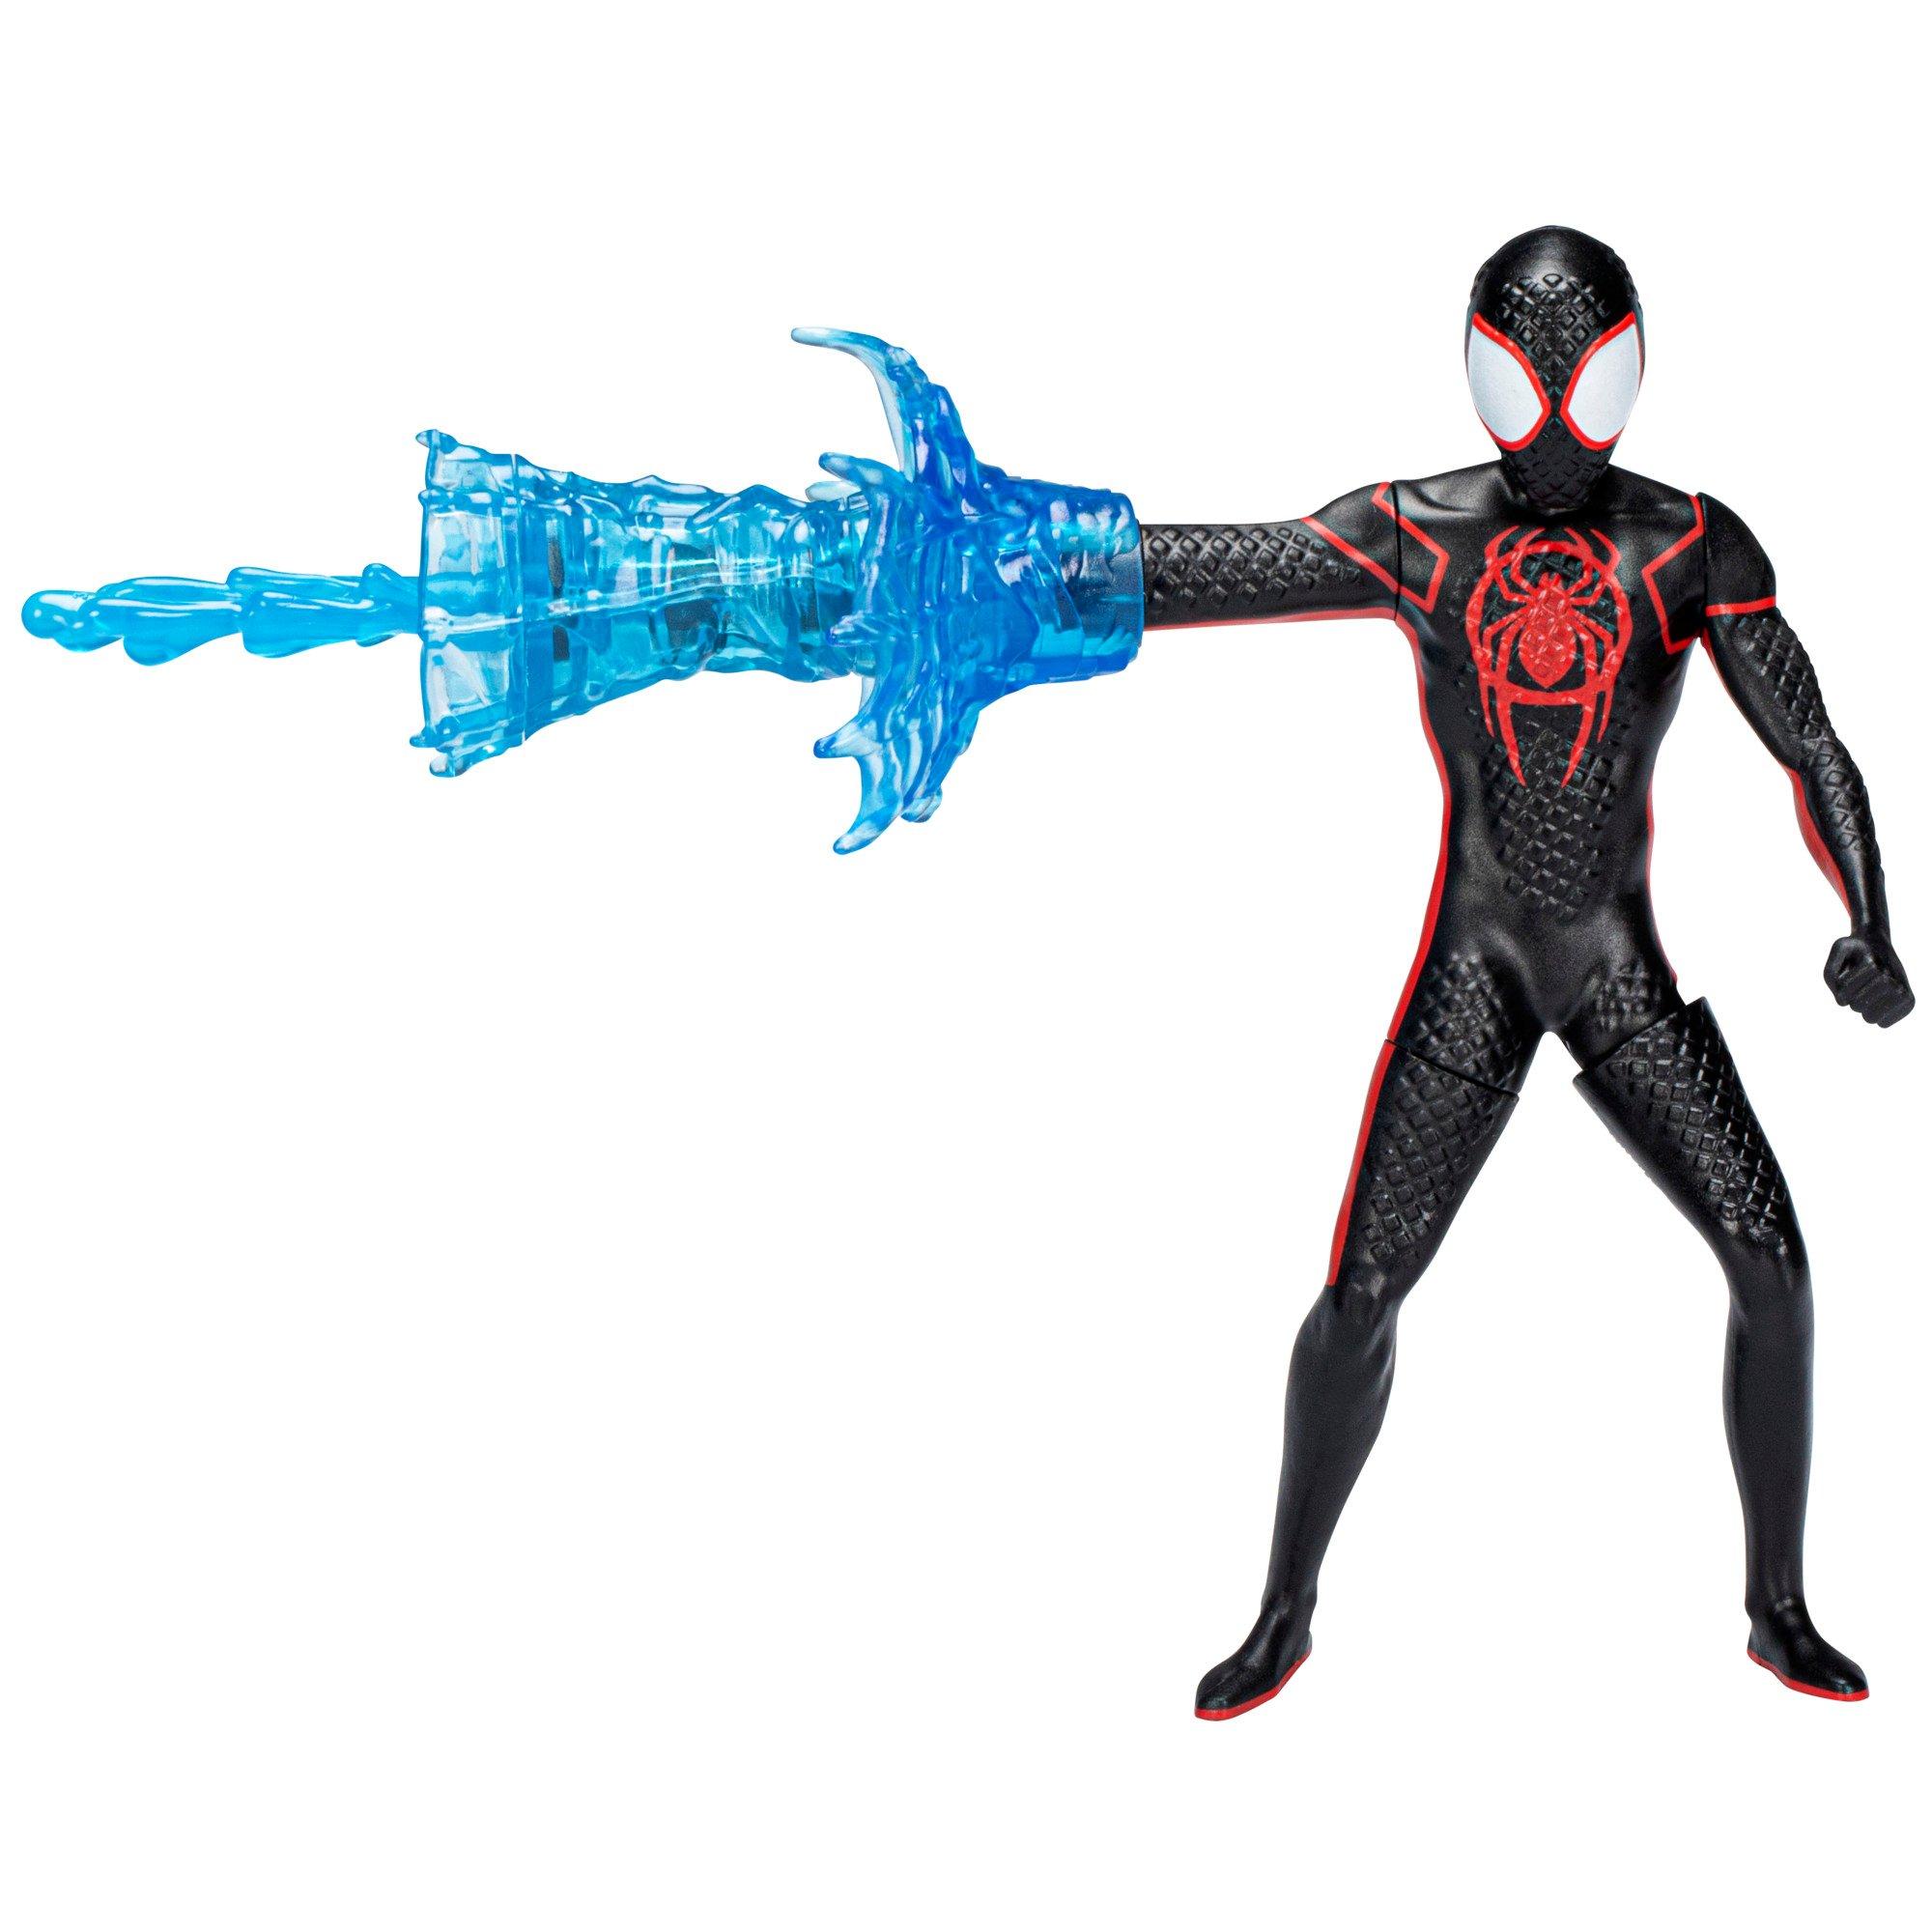 Hasbro Marvel Legends Series Spider-Man: Across the Spider-Verse (Part One)  Miles Morales 6-in Action Figure